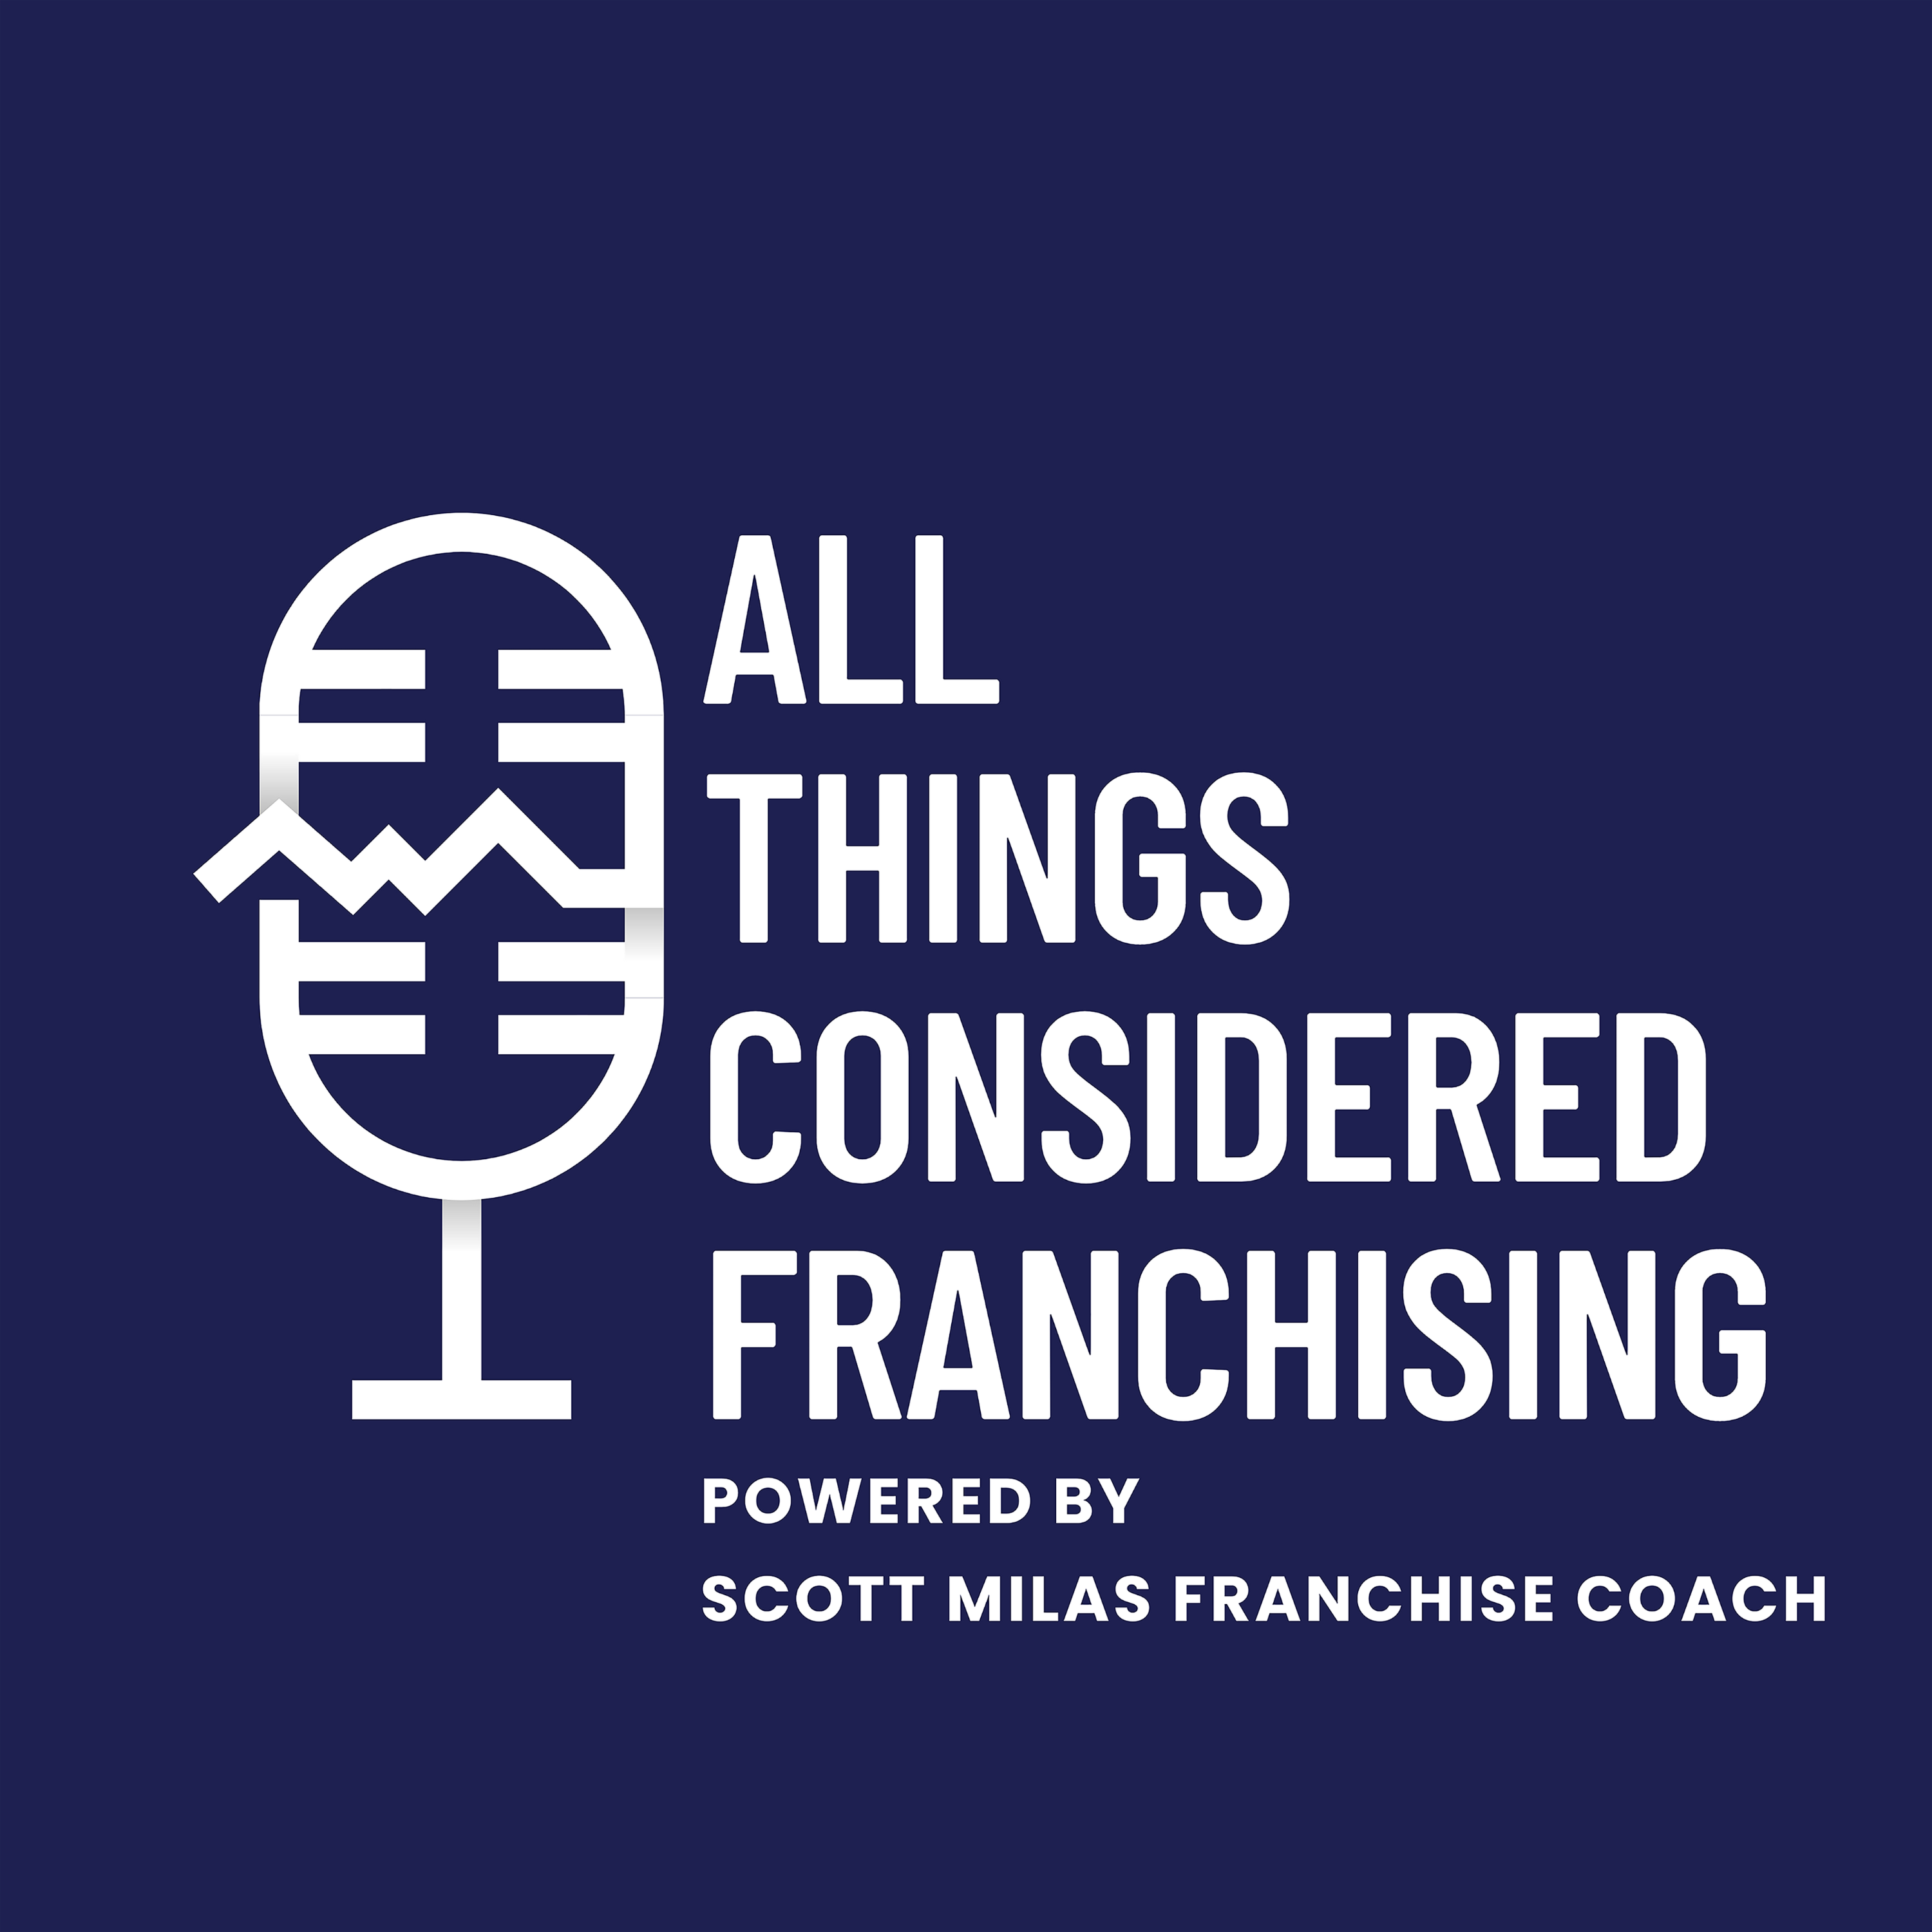 Scotty Milas' All Things Considered Franchising Podcast w/ Alicia Miller Founder & Managing Director w/ Emergent Growth Advisors